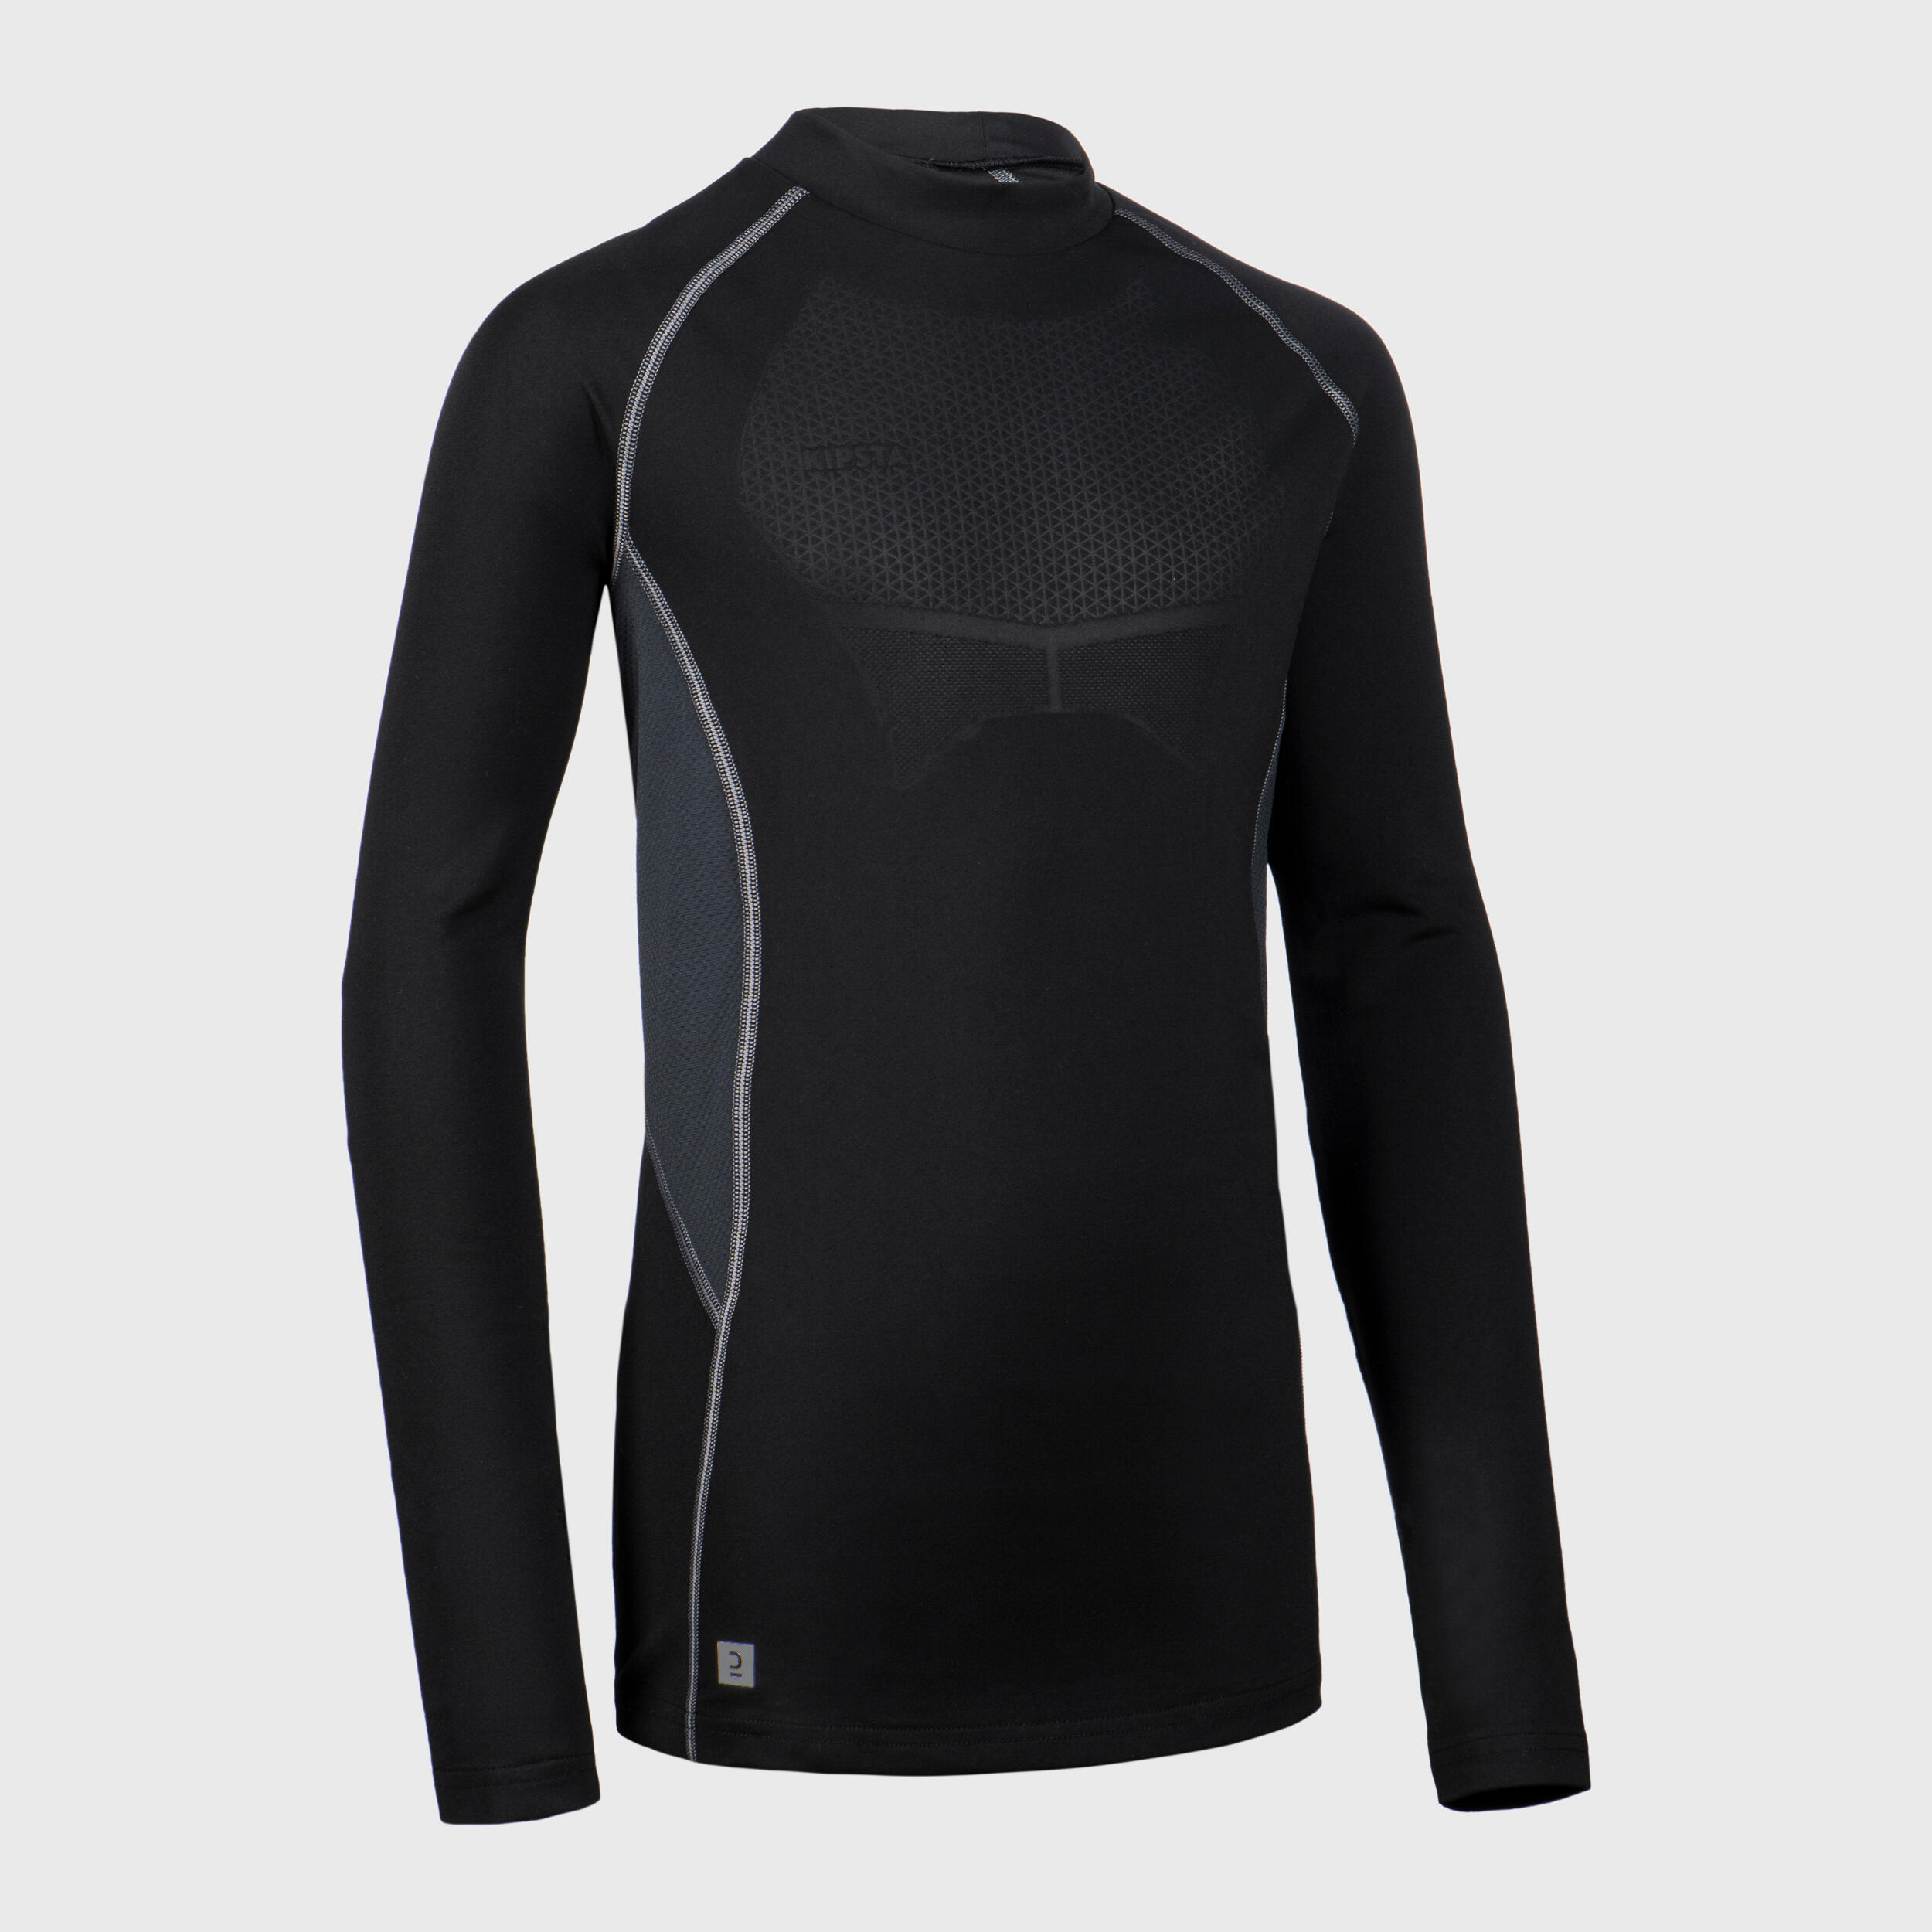 OFFLOAD Kids' Long-Sleeved Rugby Base Layer Top R500 - Black